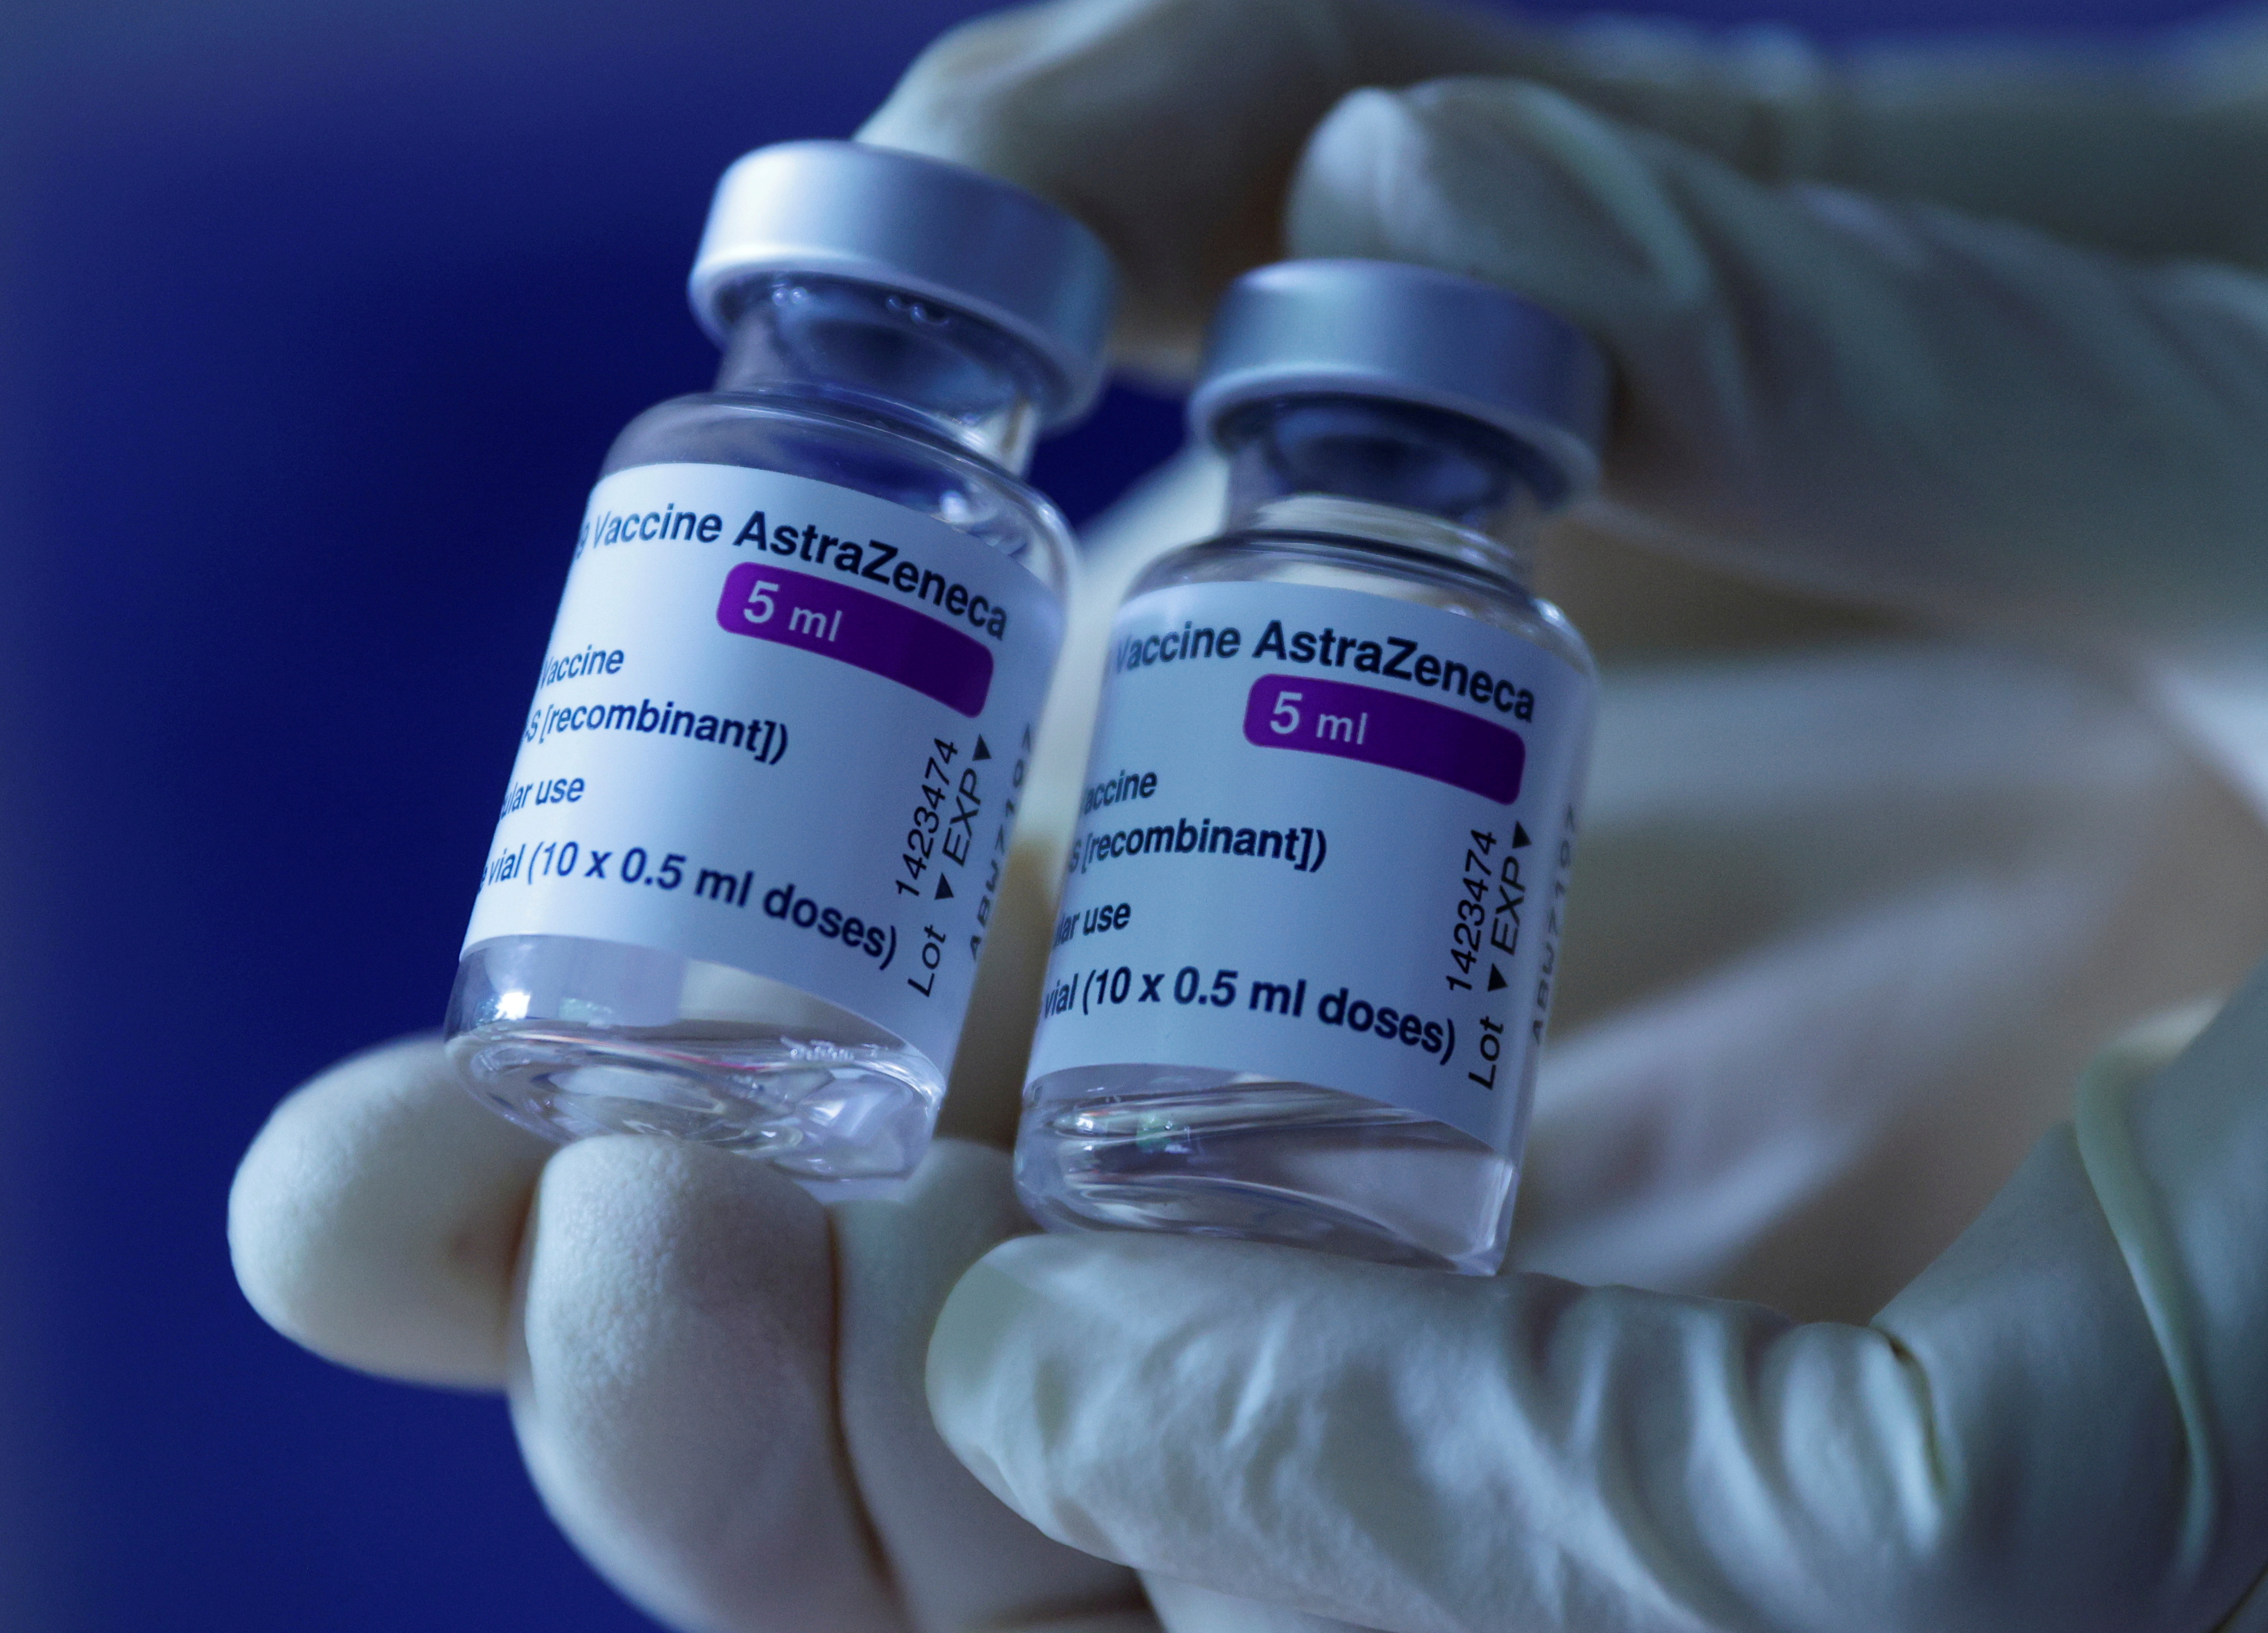 A doctor shows vials of AstraZeneca's COVID-19 vaccine in his general practice facility, as the spread of the coronavirus disease (COVID-19) continues, in Vienna, Austria